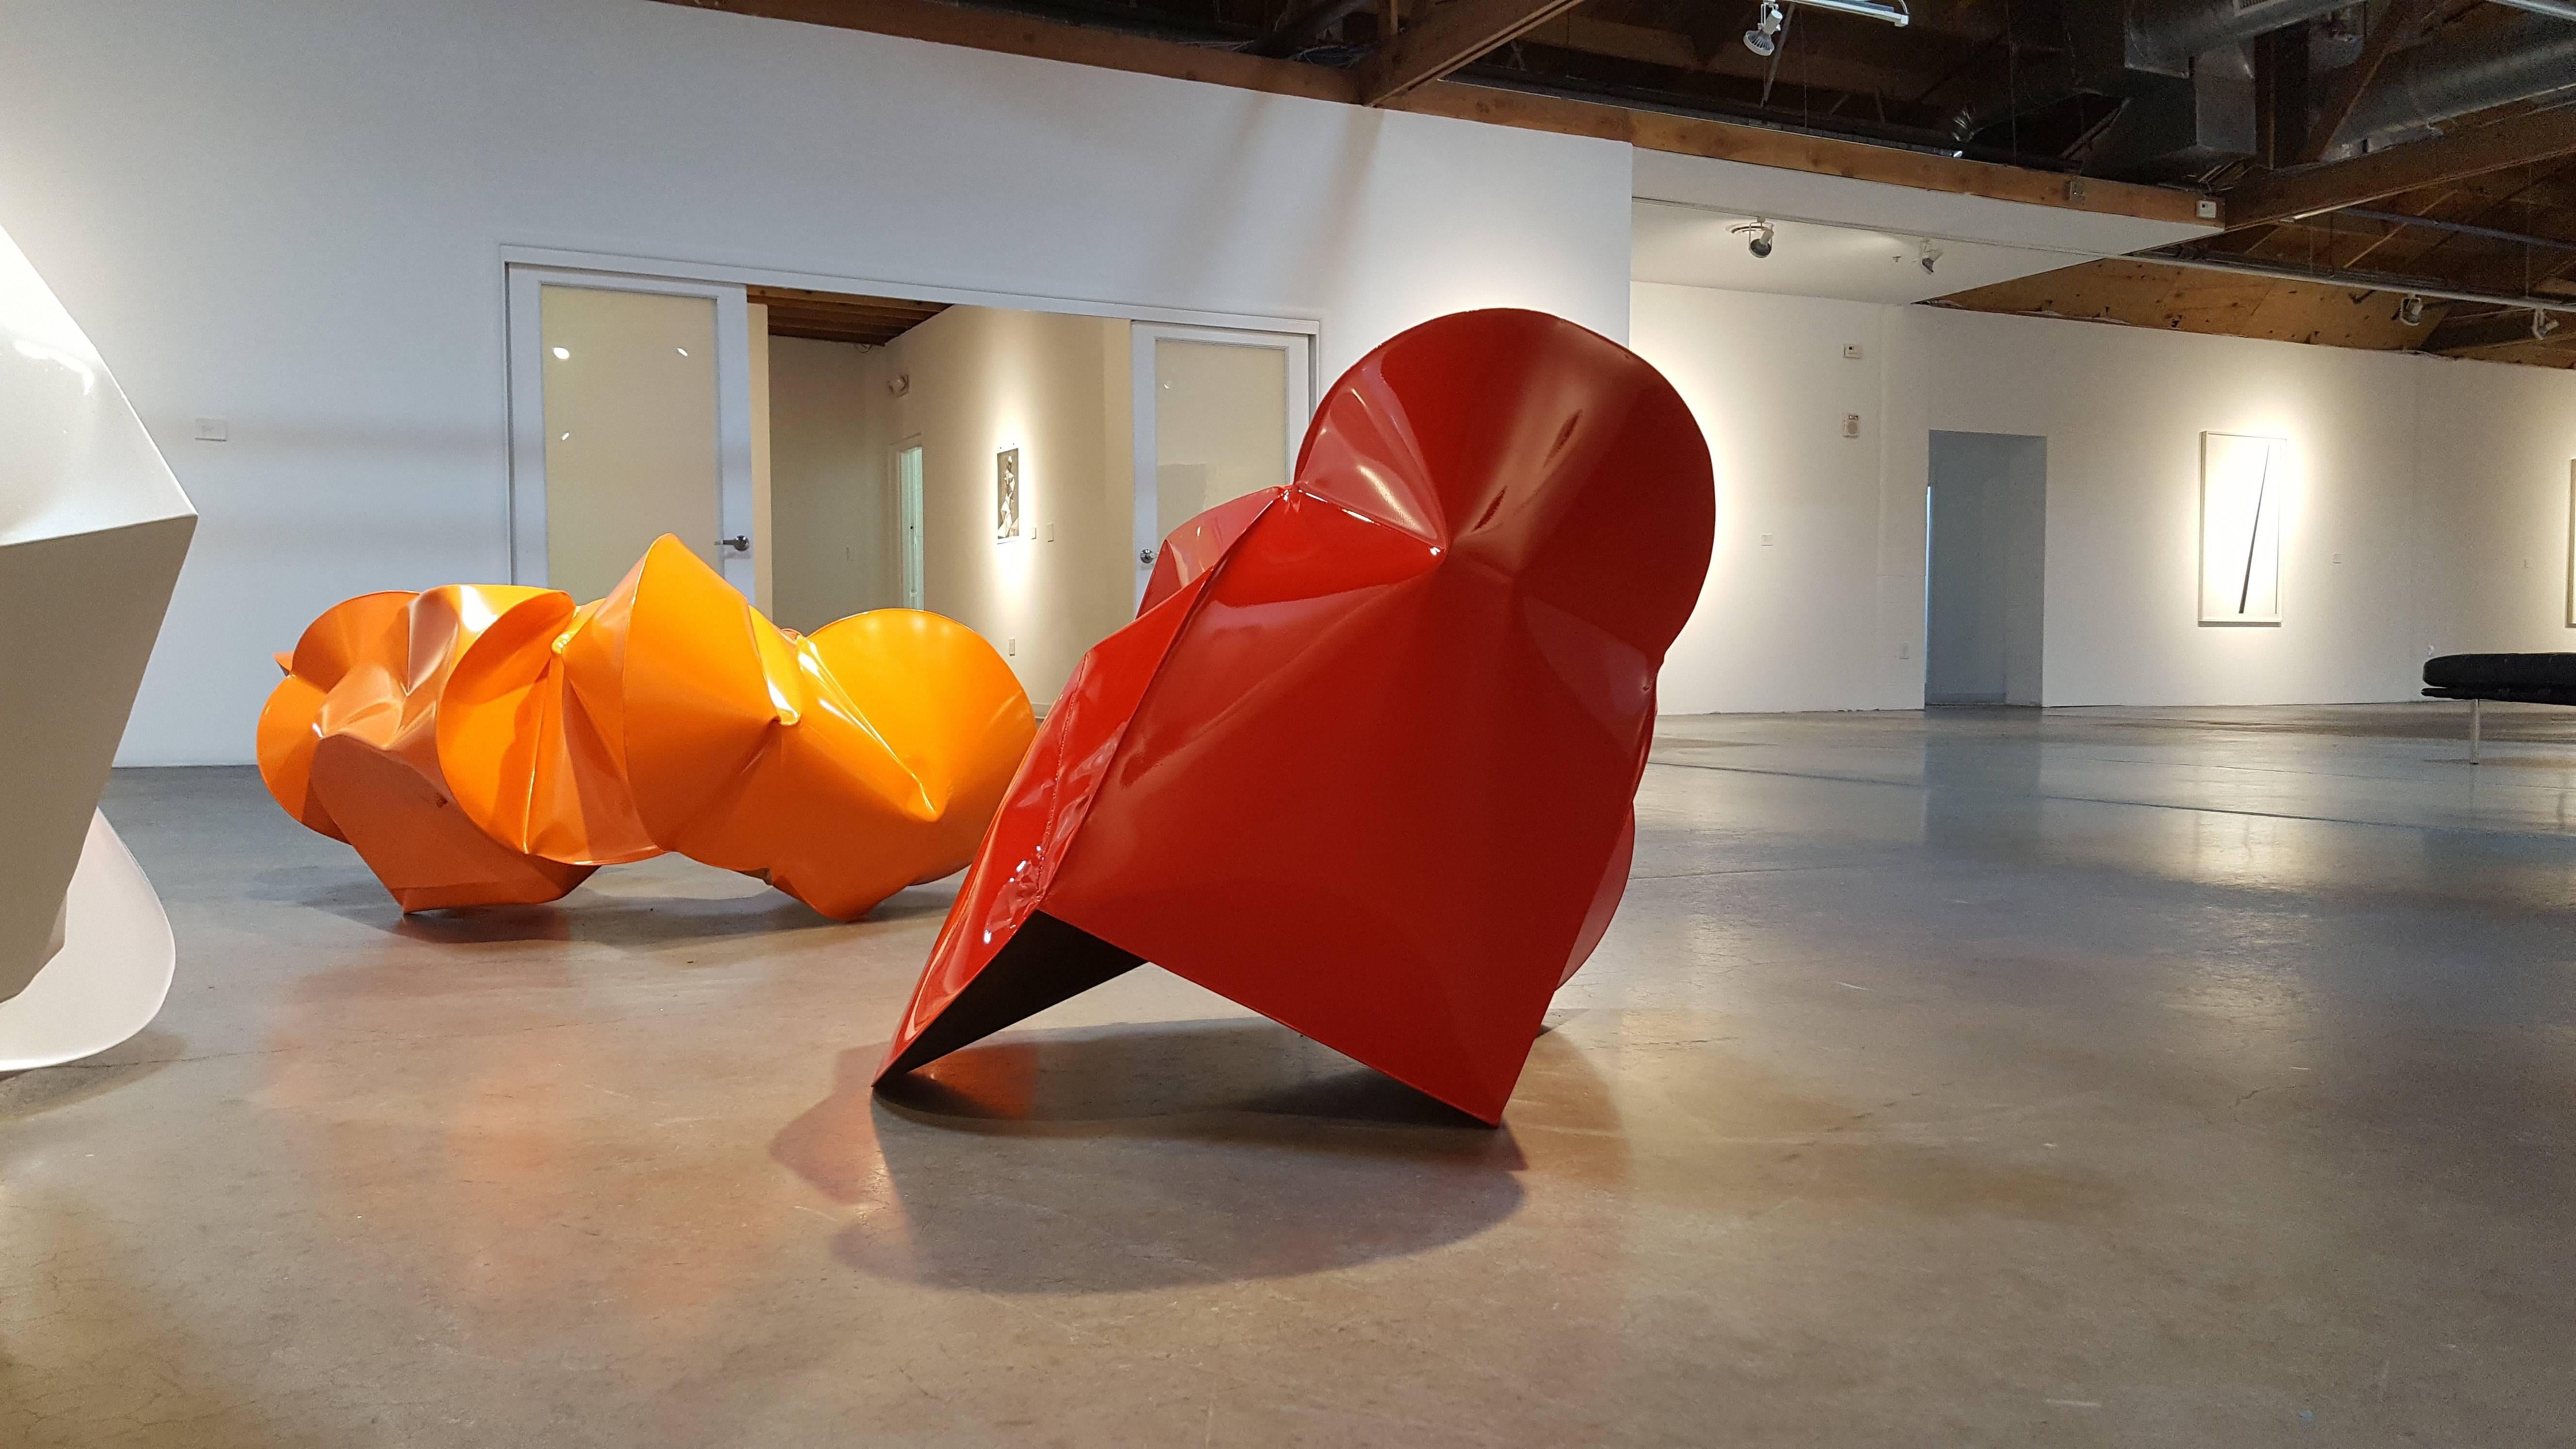 Judd Red - Sculpture by Jeremy Thomas